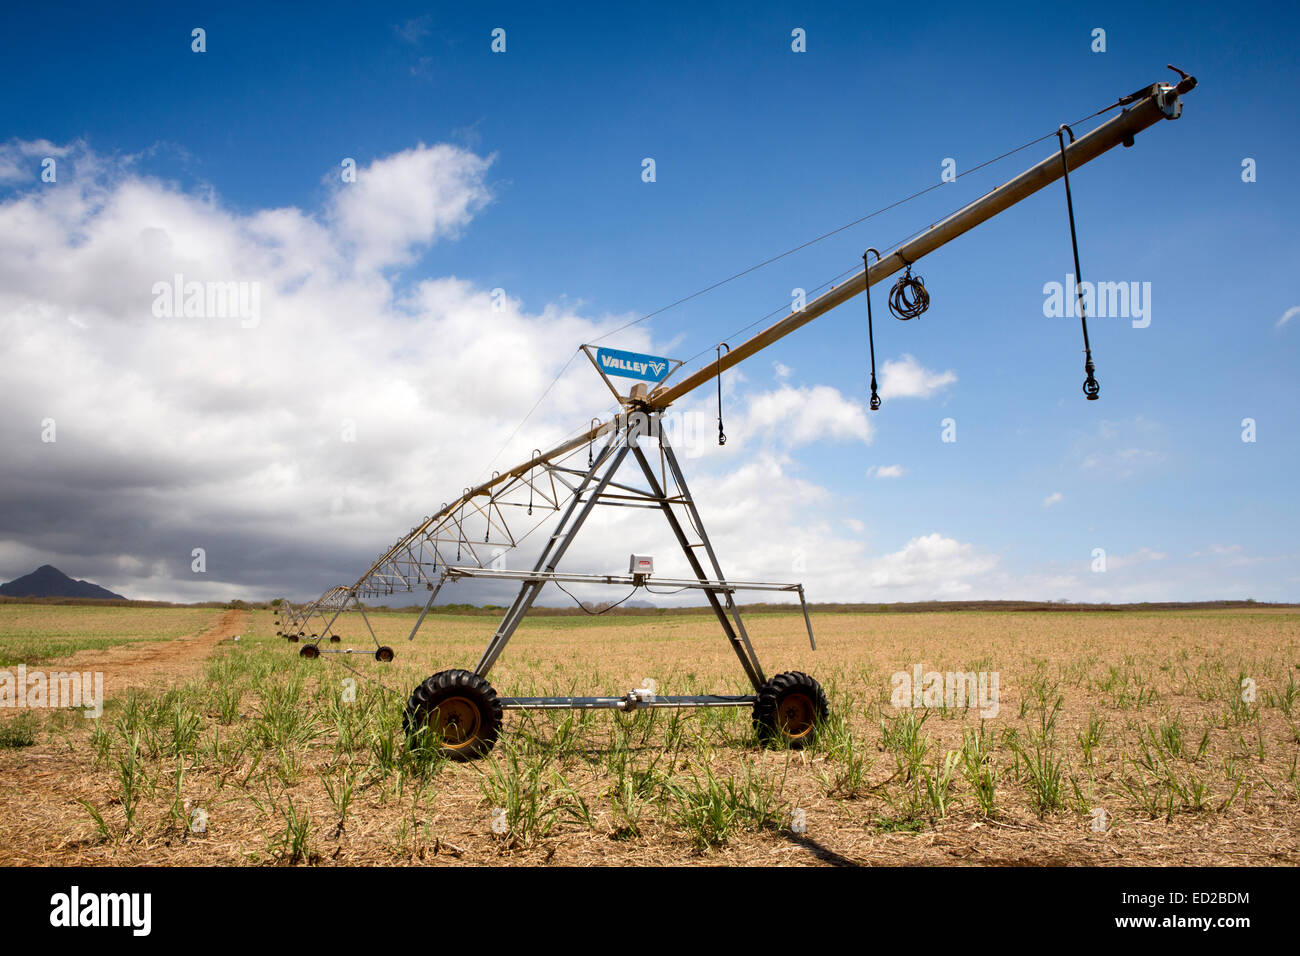 Mauritius, Albion, agriculture, Valley linear crop irrigation machine in newly planted sugar cane field Stock Photo